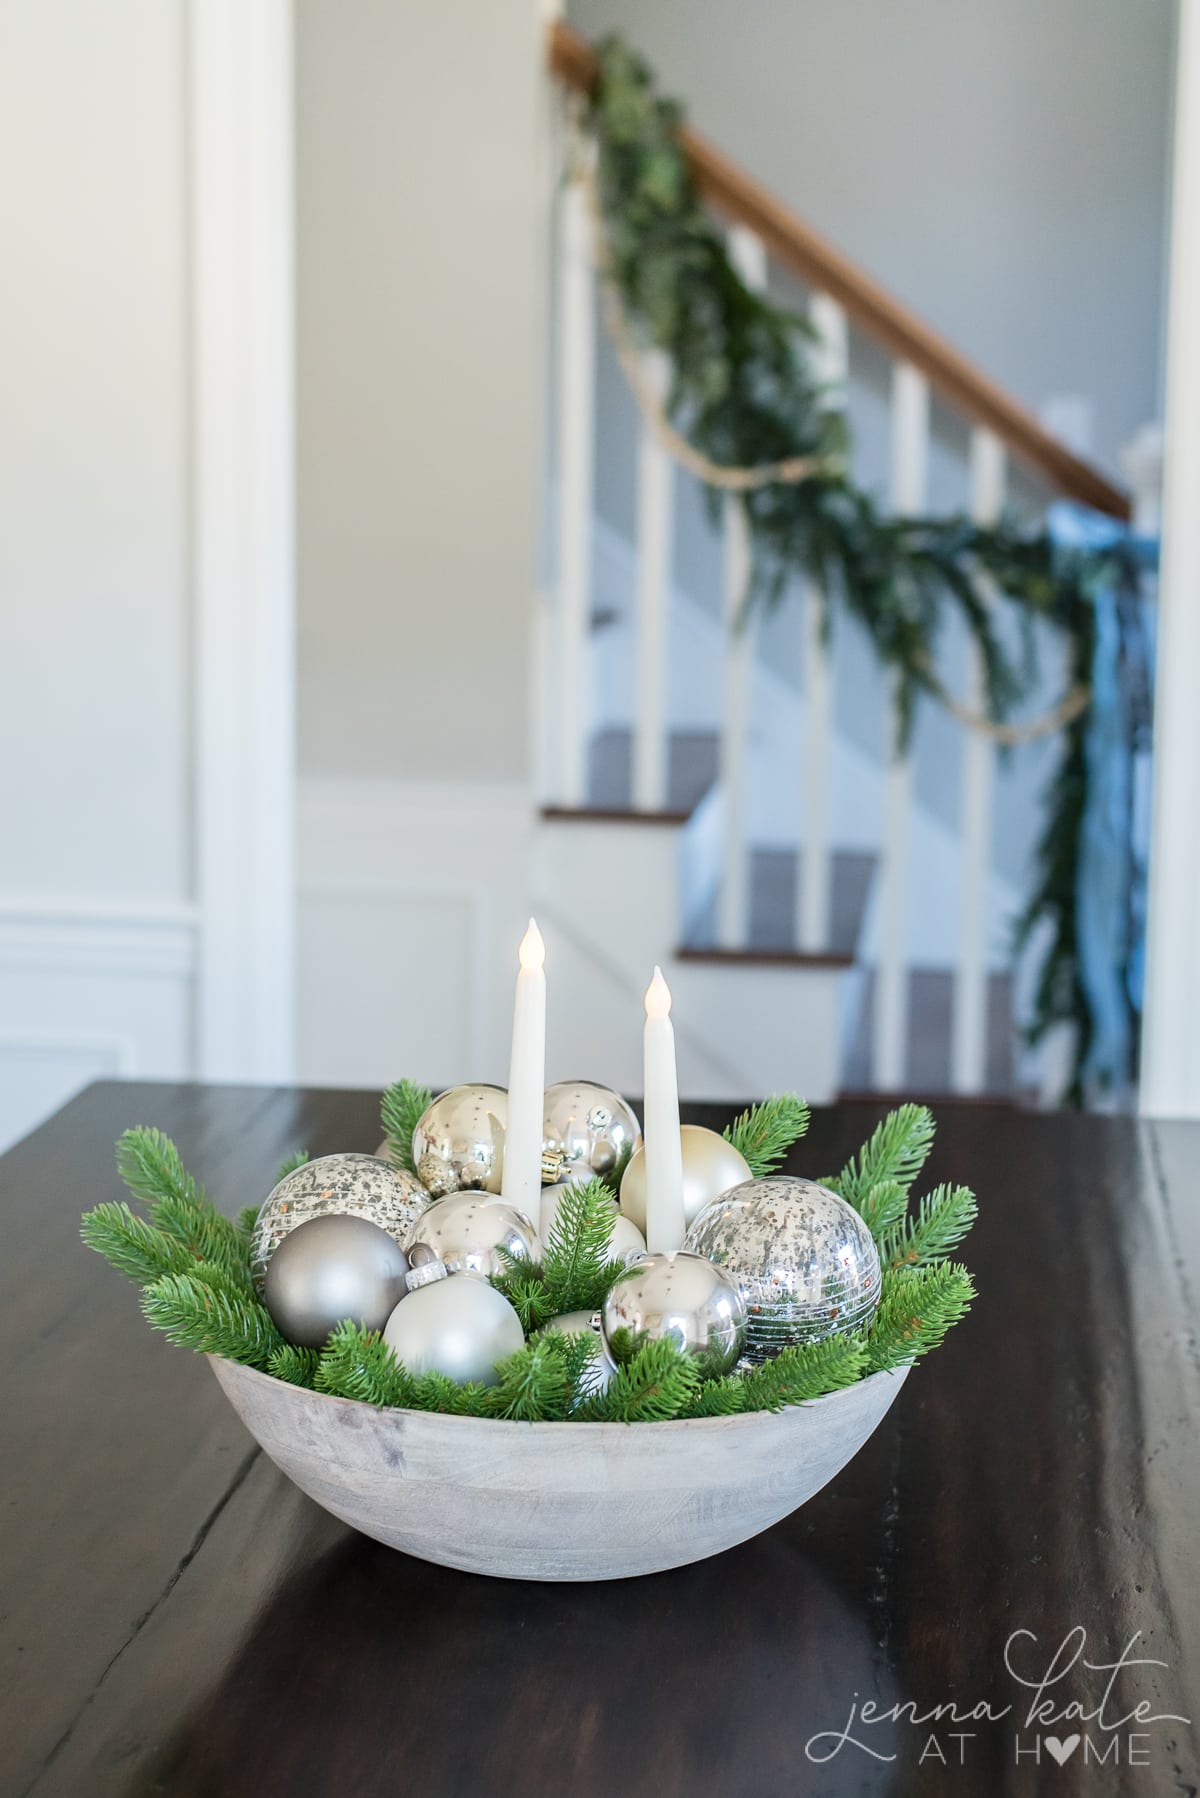 A bowl filled with greenery and ornament balls, with 2 battery operated candle in the middle